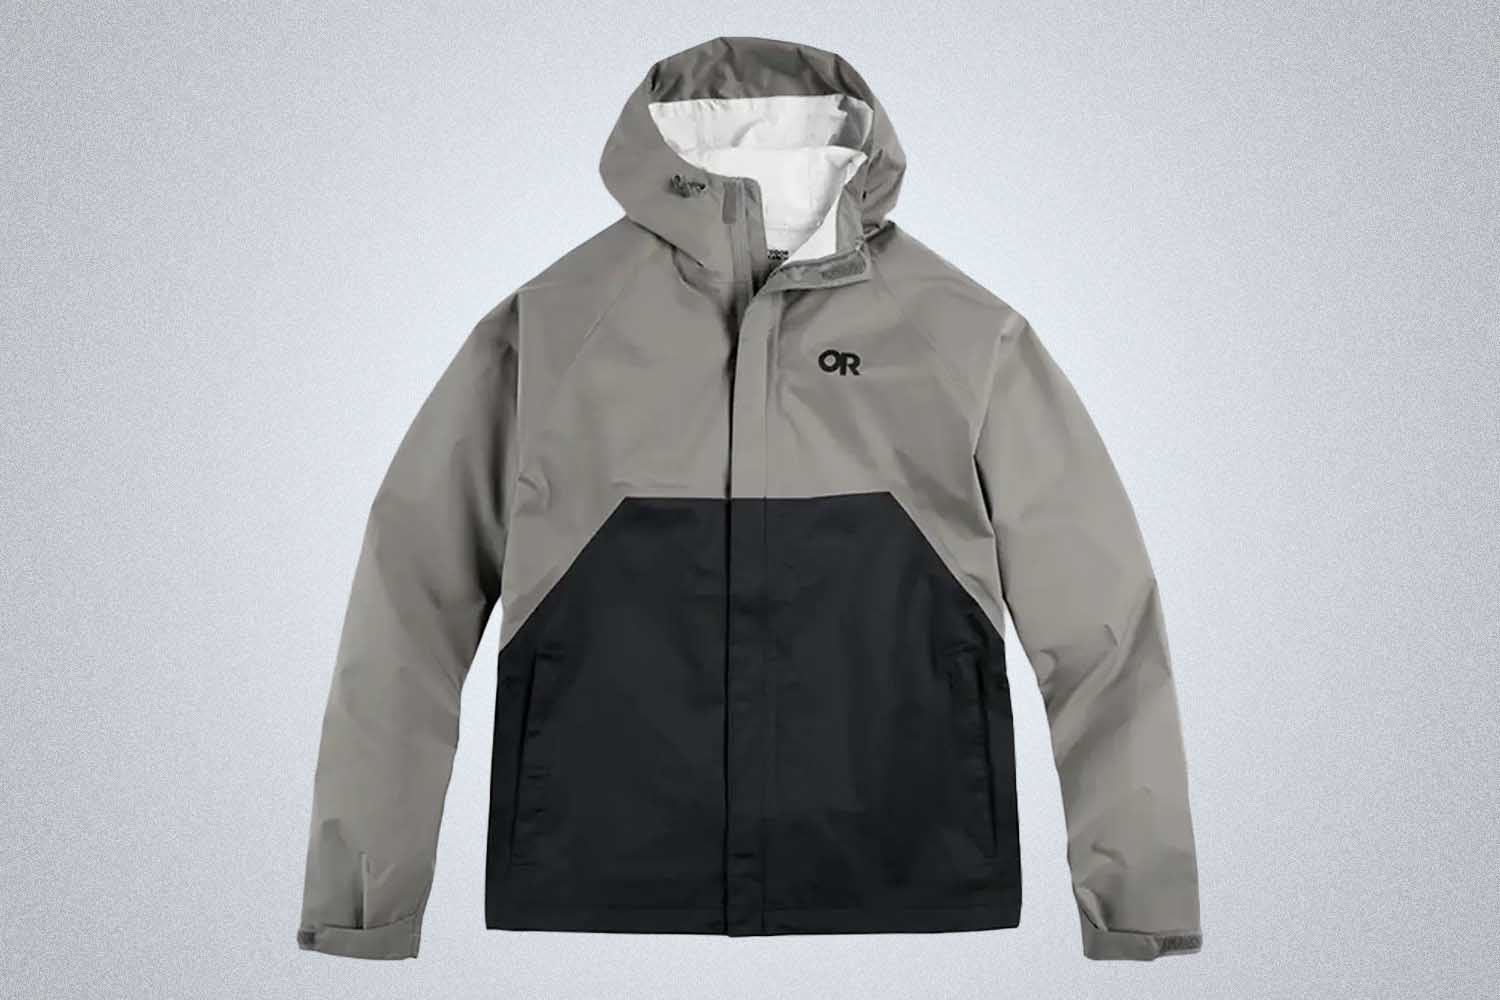 a grey and black lightweight jacket from Outdoor Research on a grey background